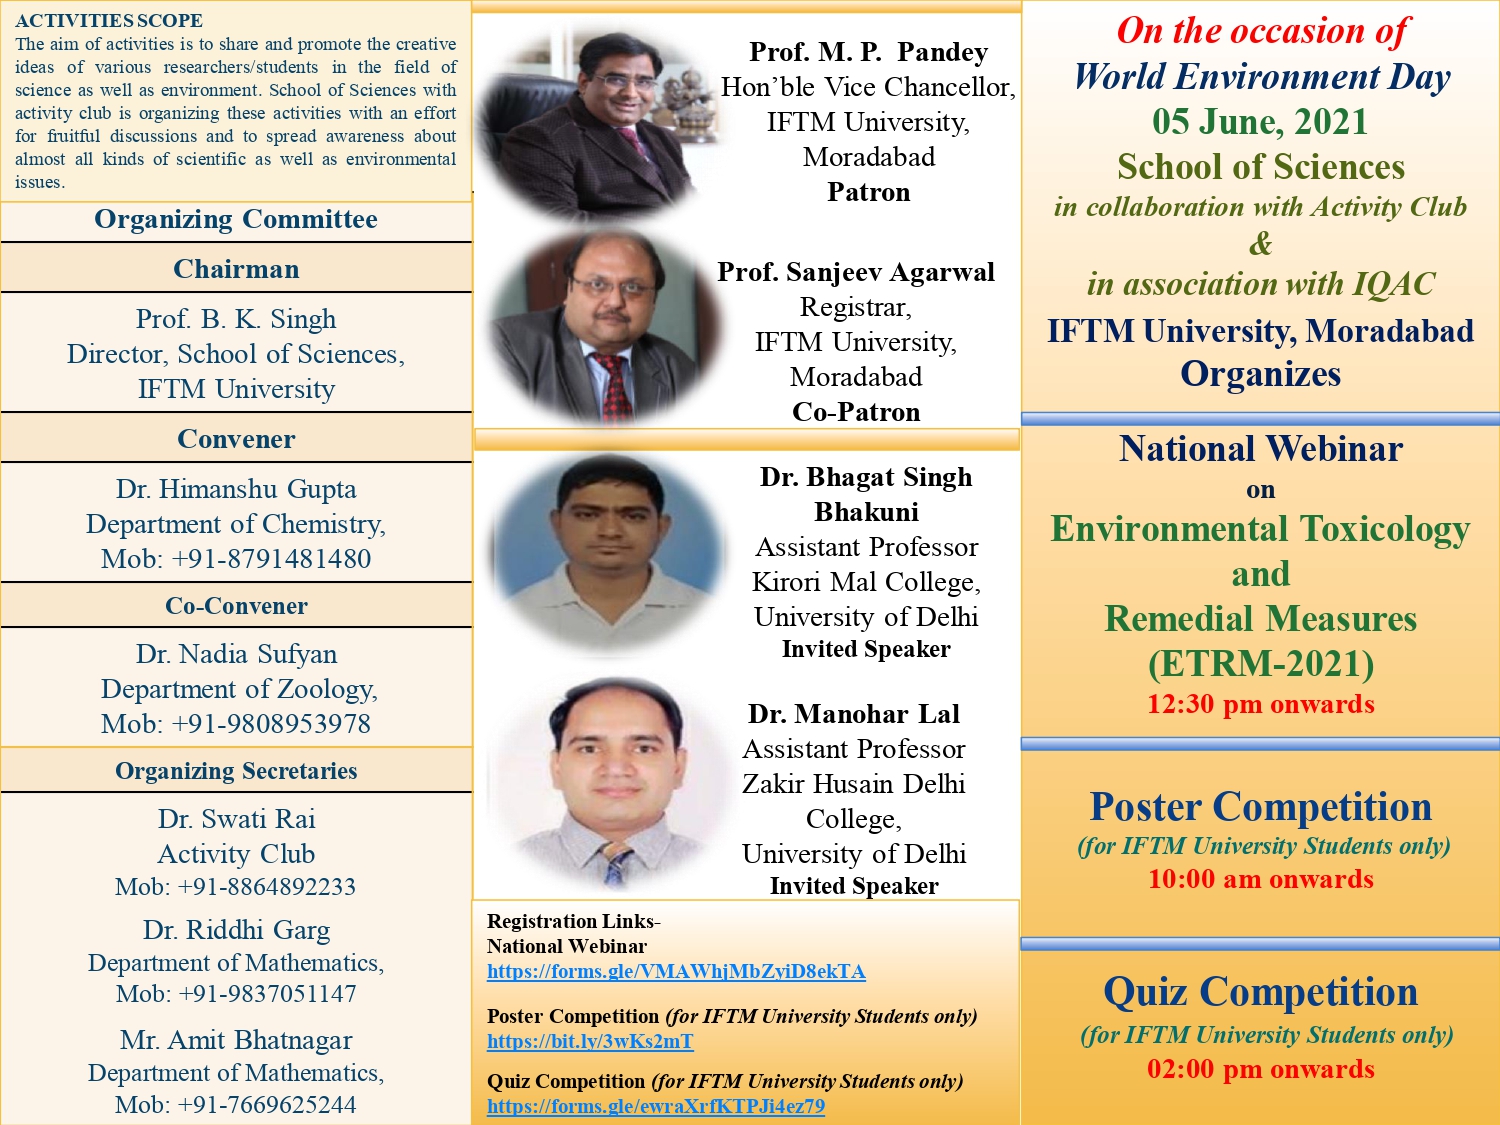 National Webinar, Poster Competition, Quiz Competition on World Environment Day